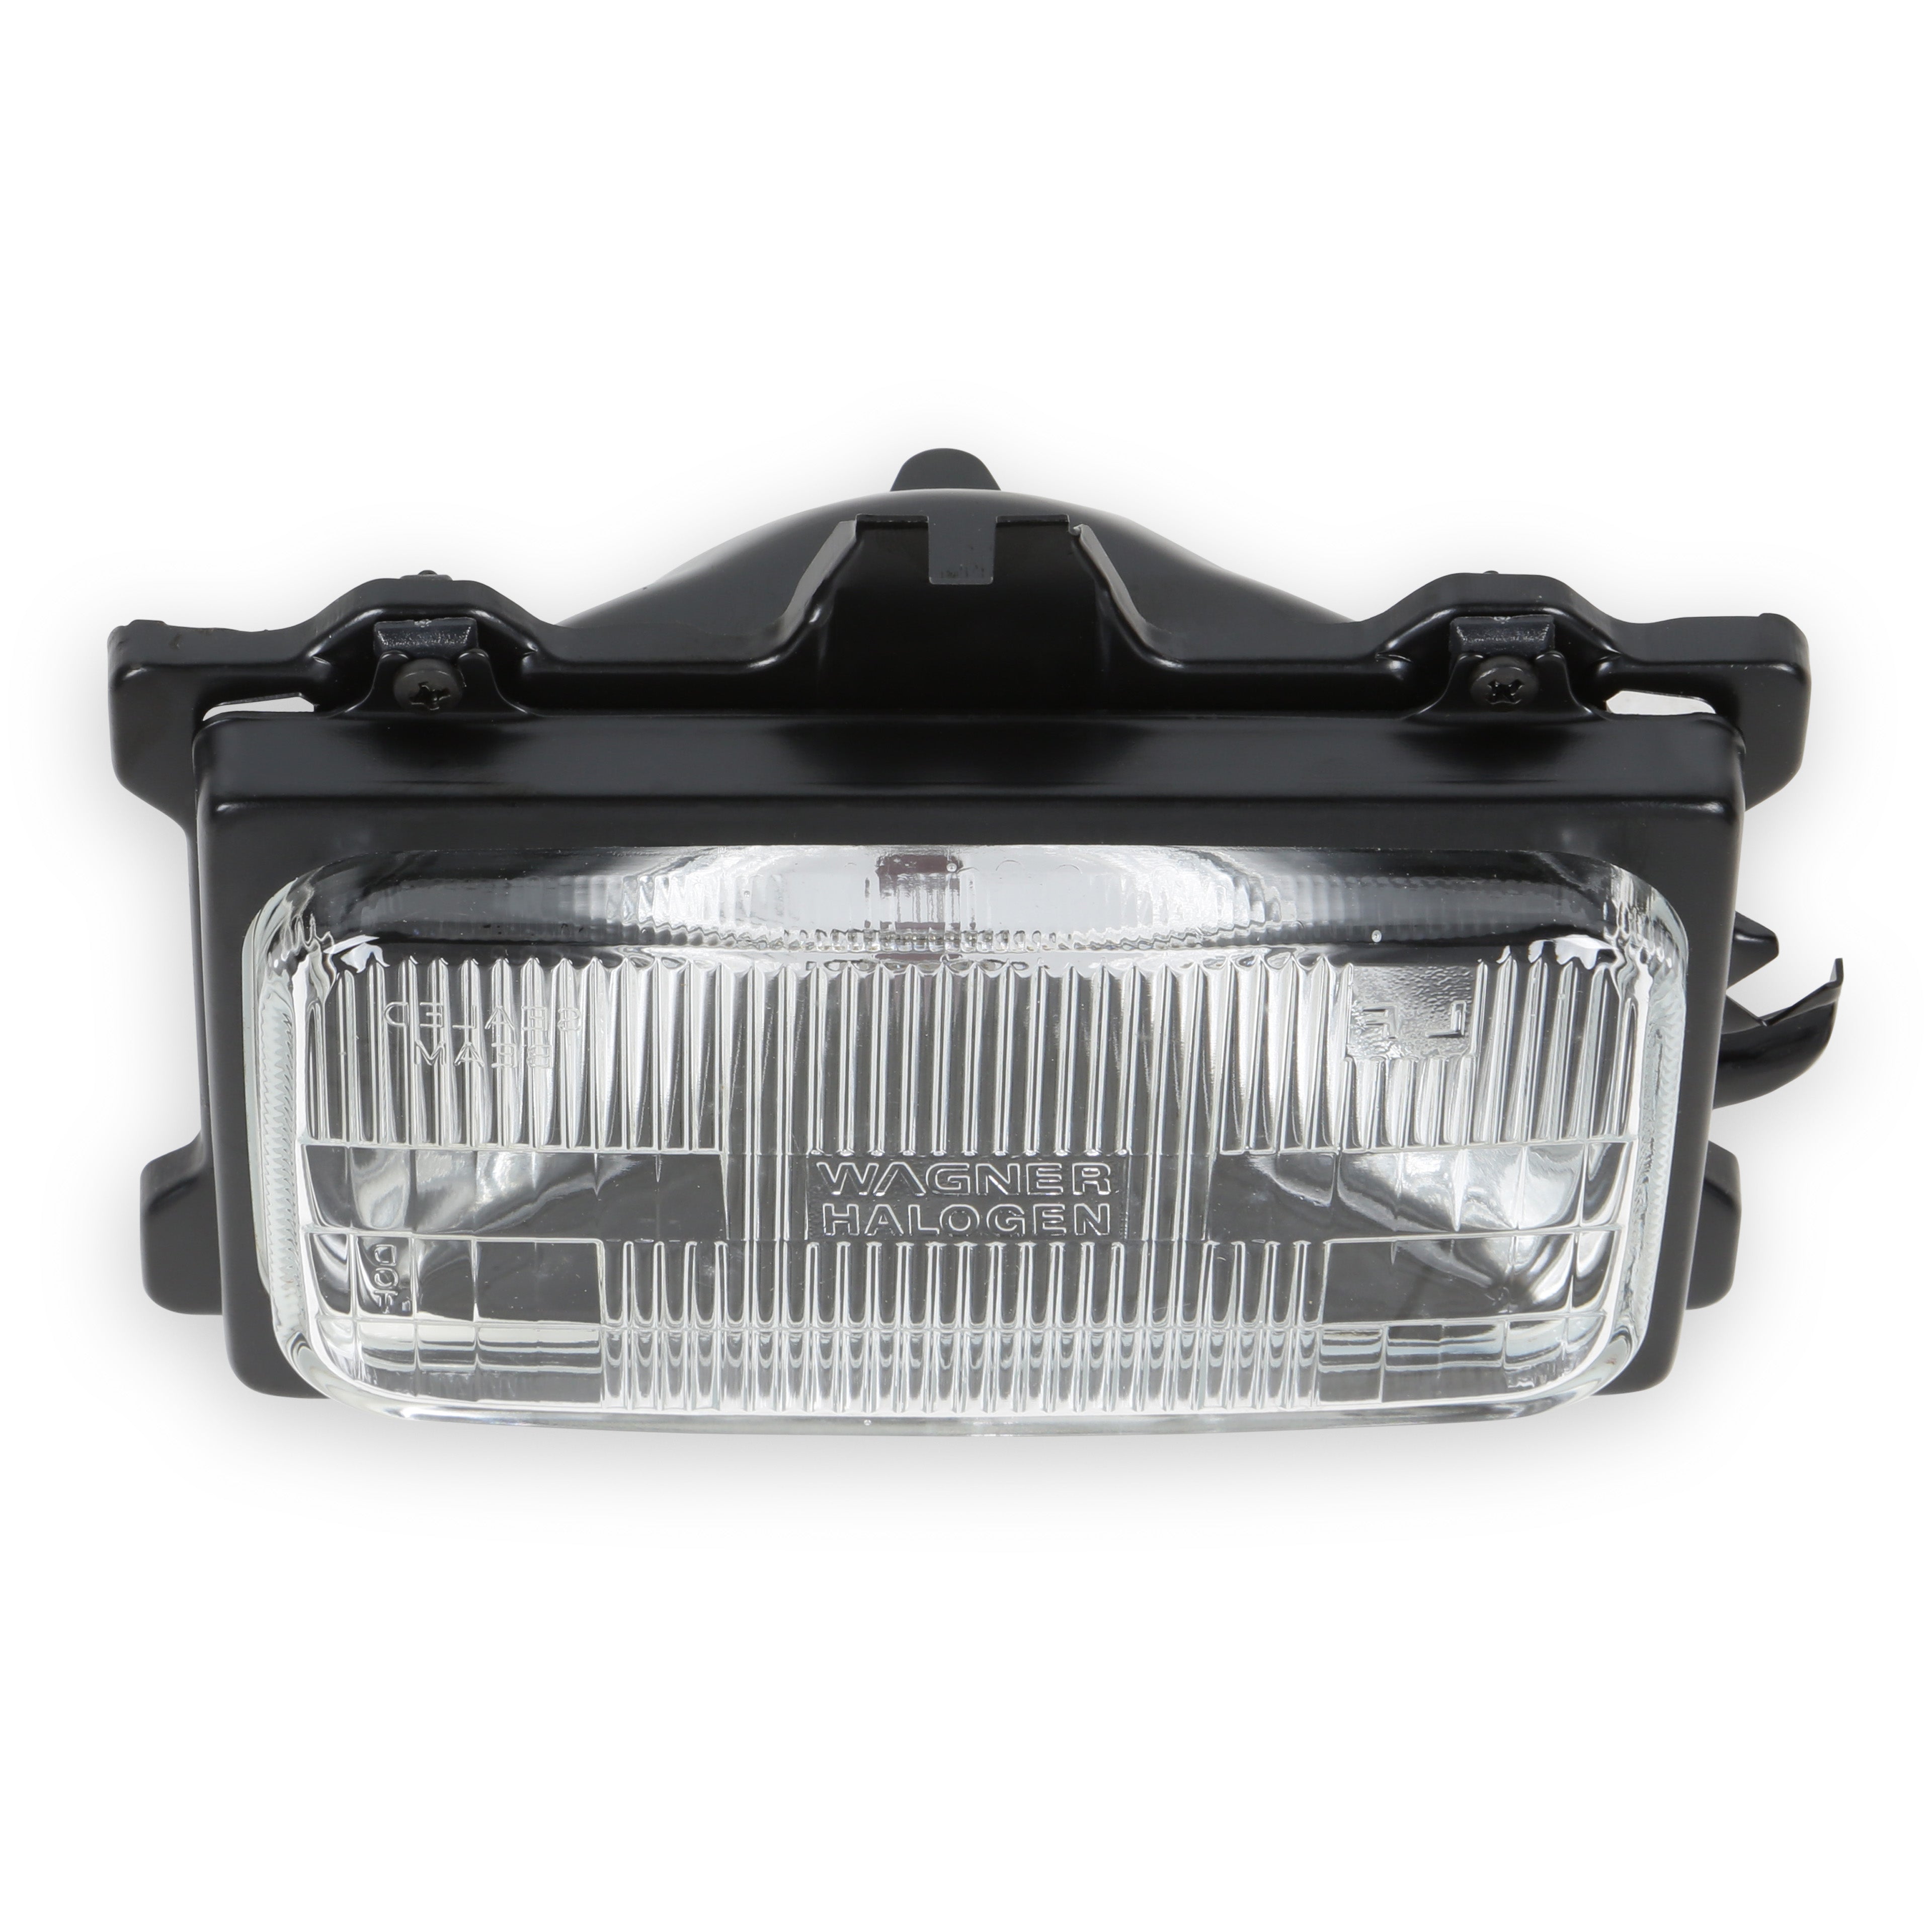 BROTHERS GMT400 Dual Headlight Outer Lamp - RH pn 07-116